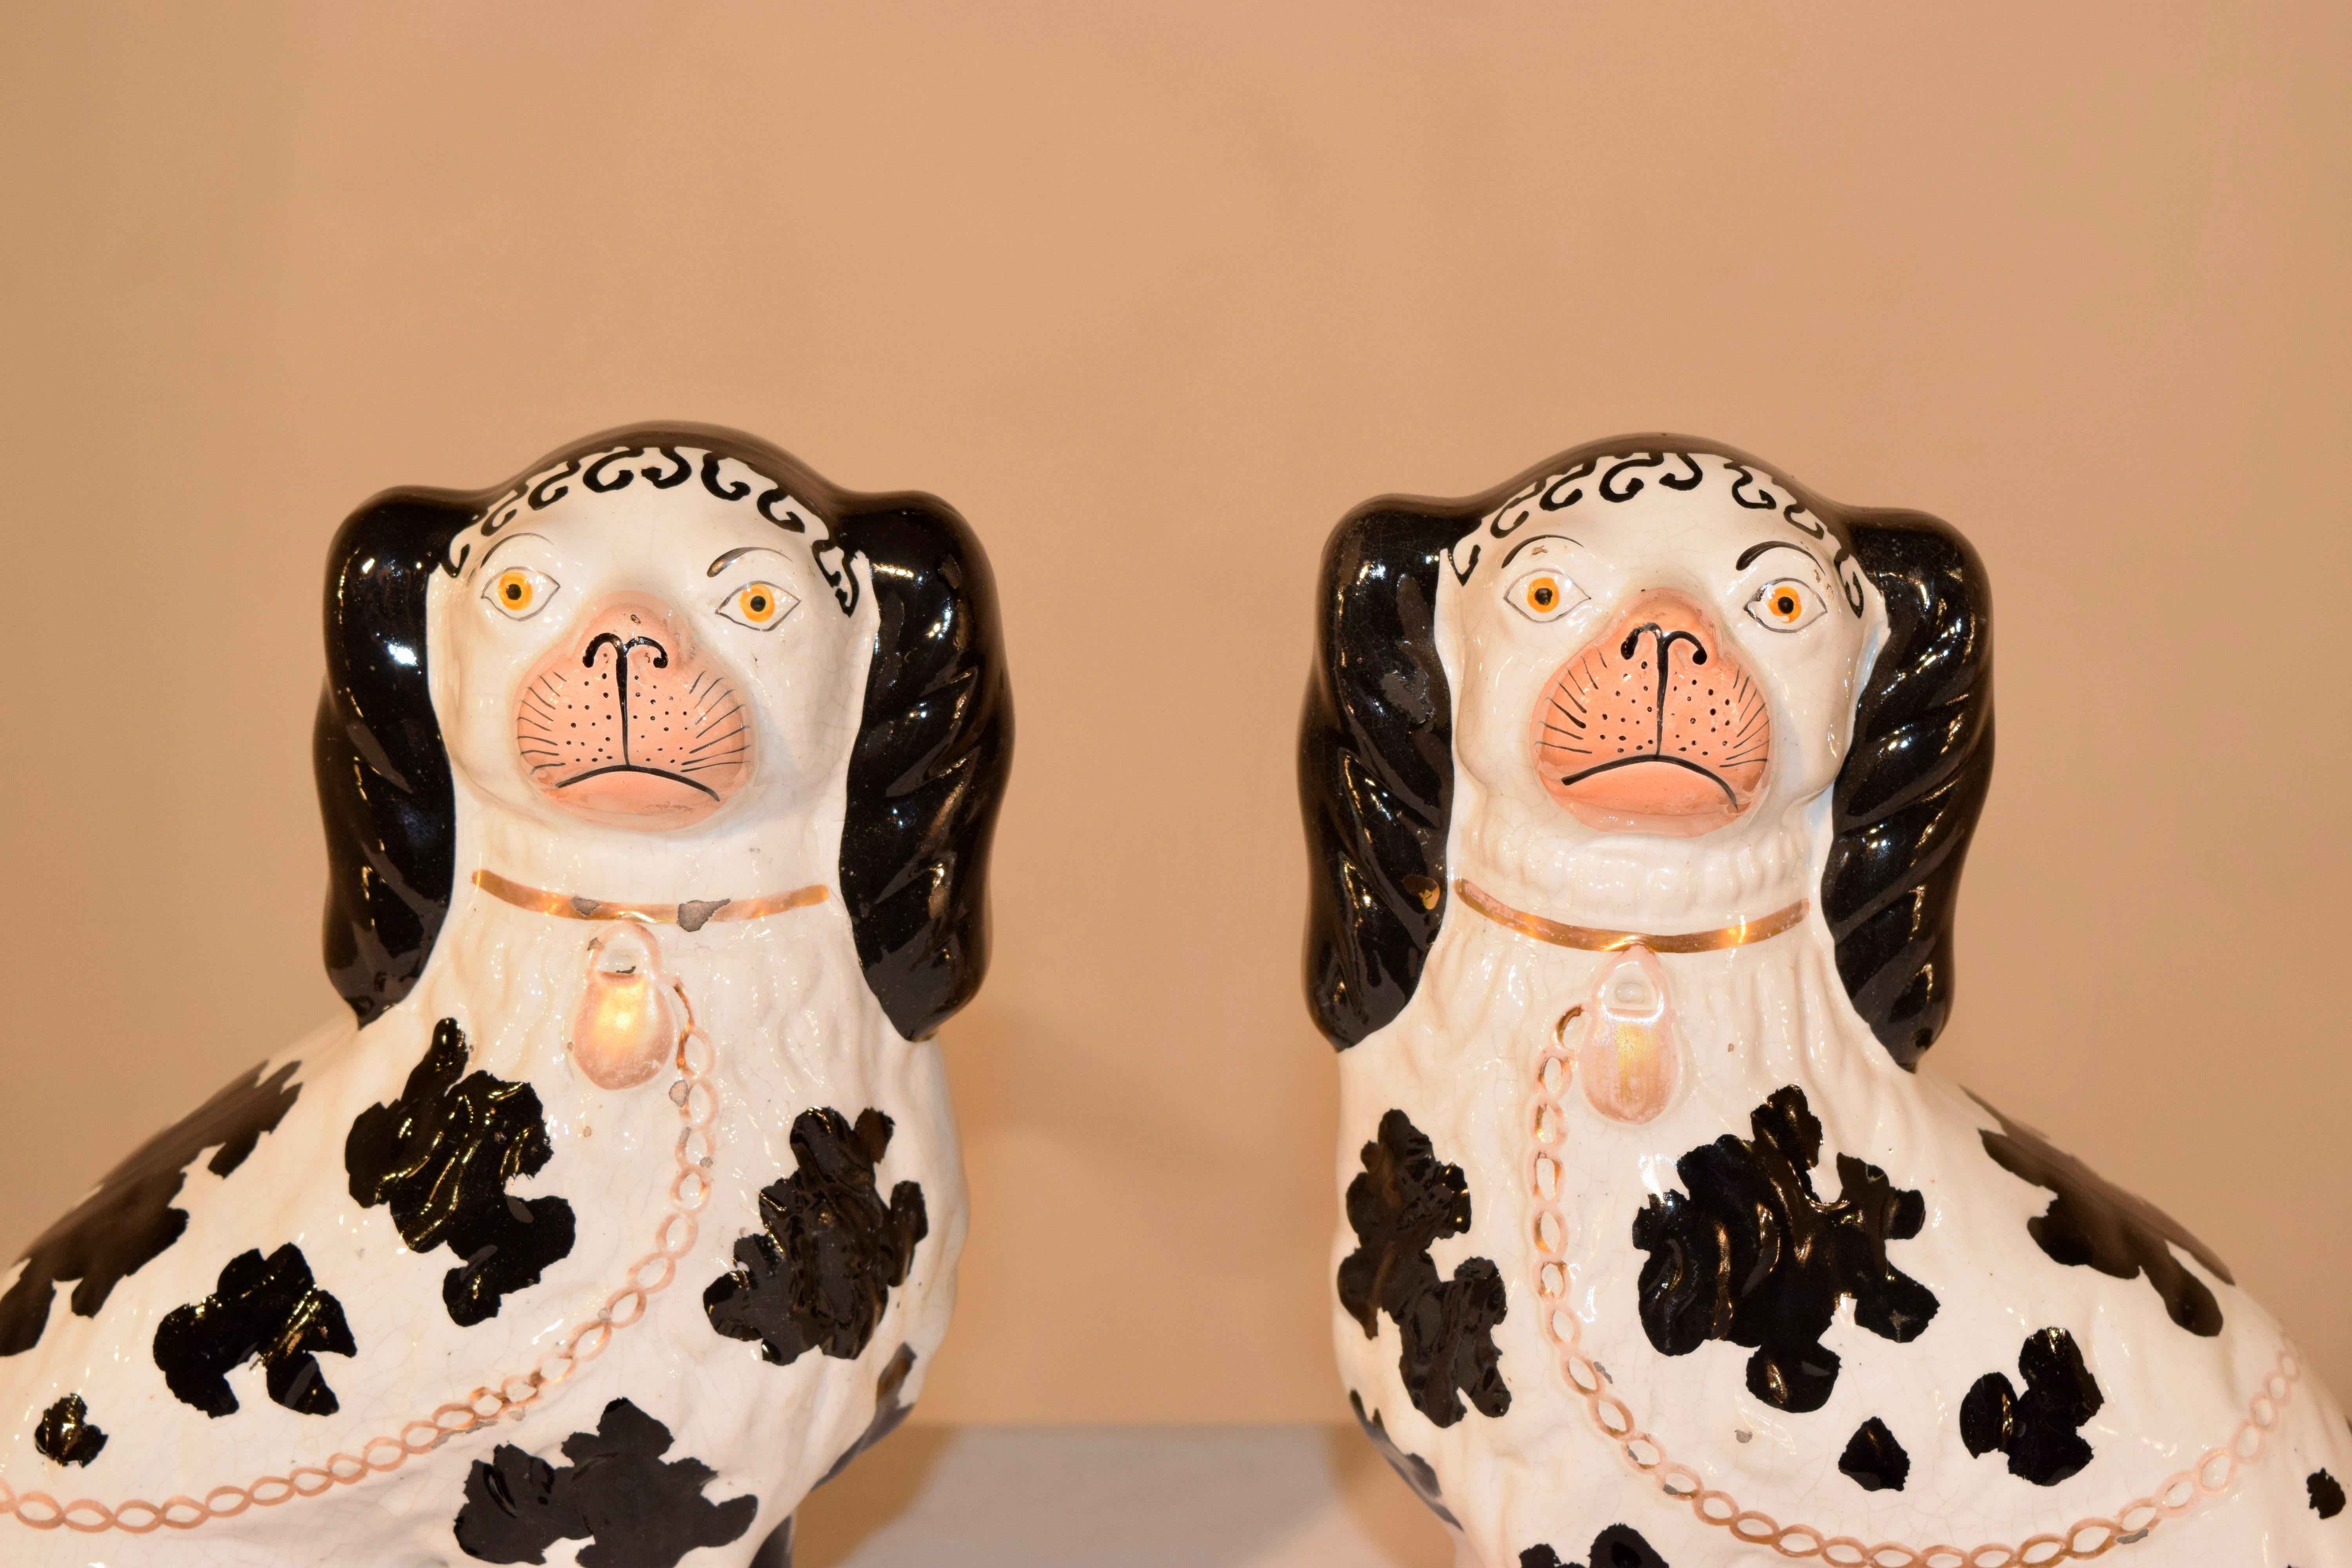 19th century pair of Staffordshire spaniels in the Disraeli style. The spaniels have separated front legs, and are painted in a black and white design. The design is named after Benjamin Disraeli, who was the Prime Minister to England twice during